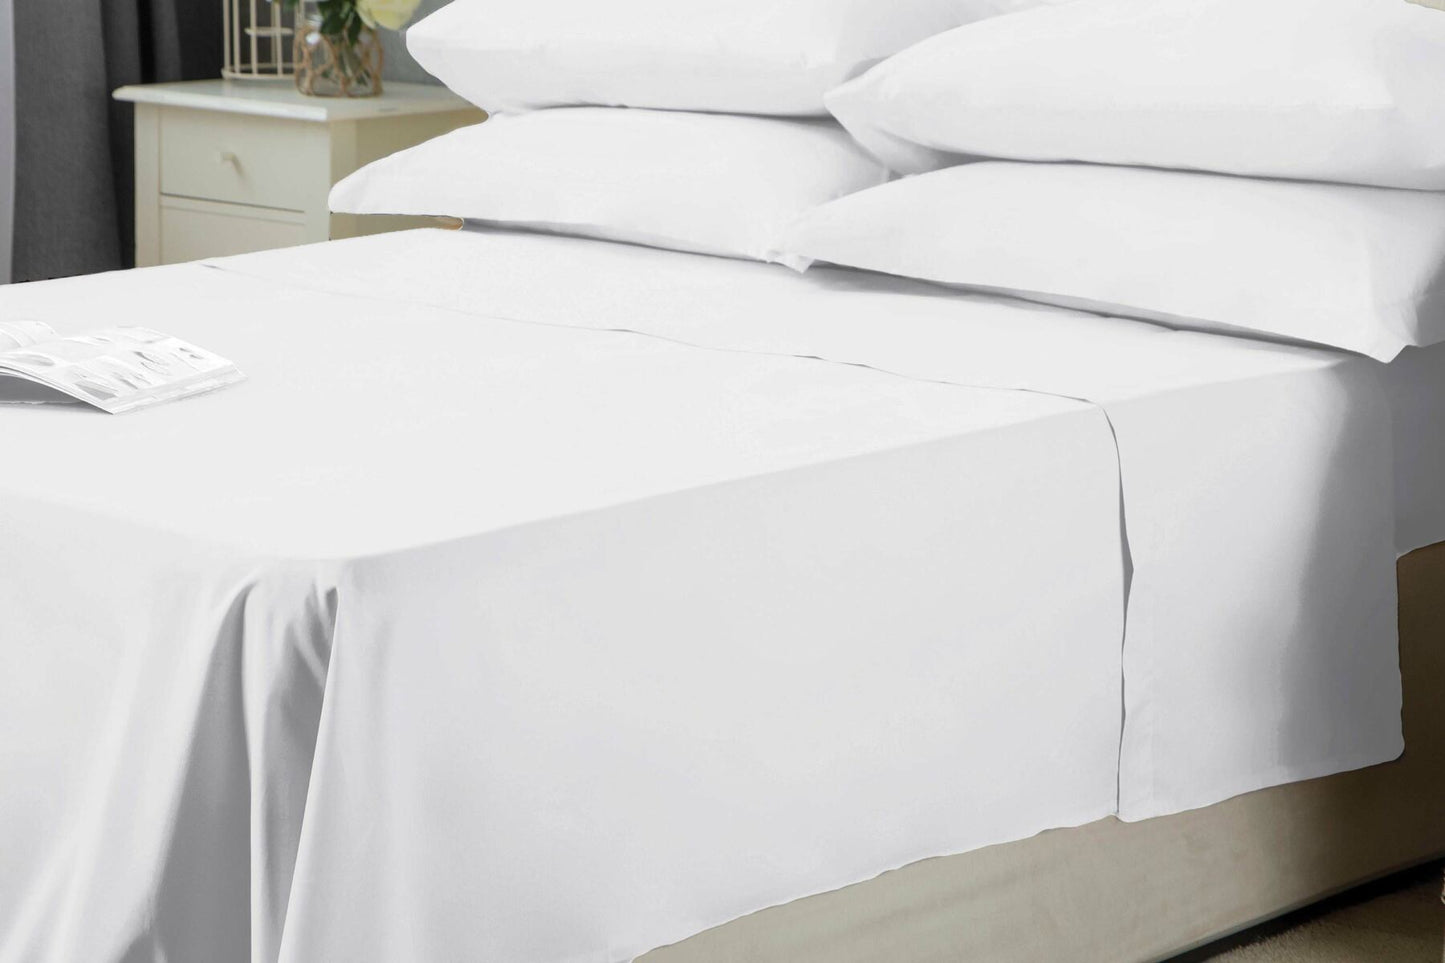 Belledorm-Flat Sheets-Luxury Percale-200 Thread Count-Navy